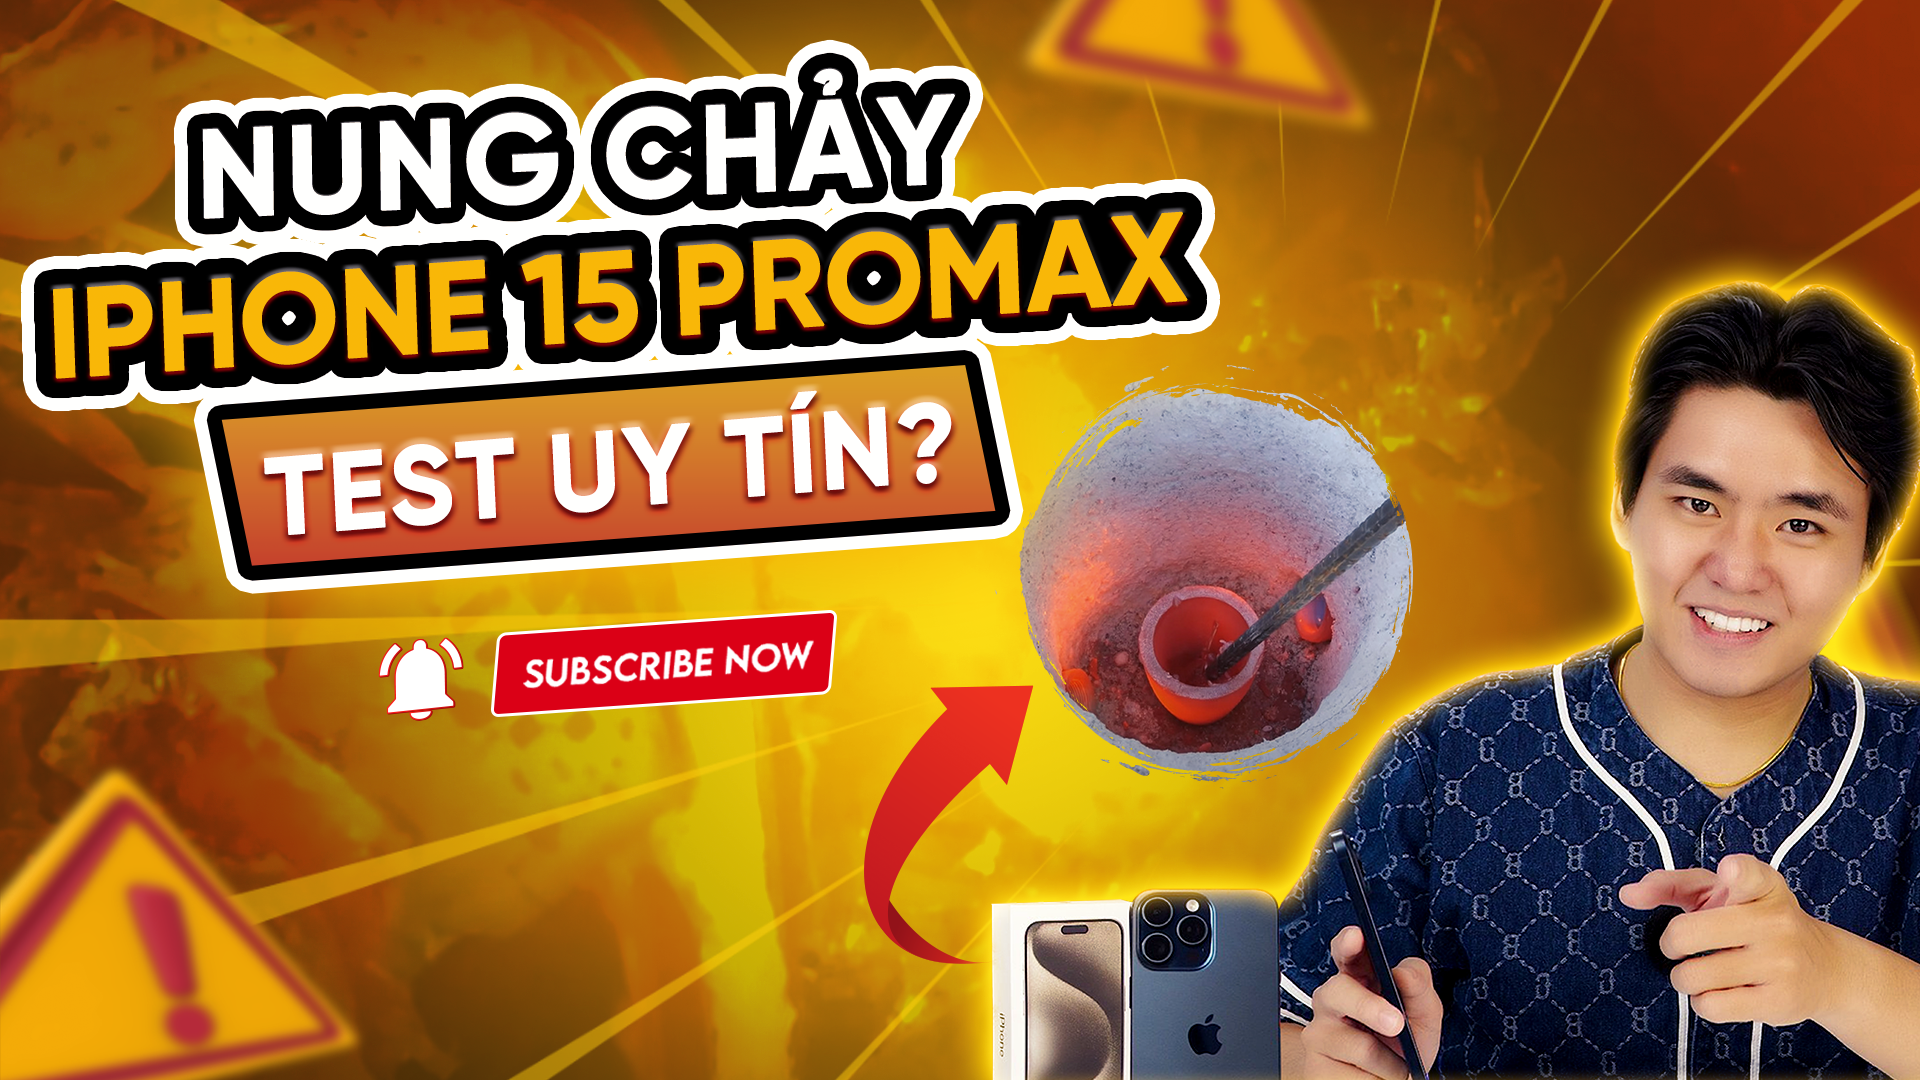 Nung chảy Iphone 15 promax  Didonghanhphuc.vn #apple #iphone15 #iphone15promax